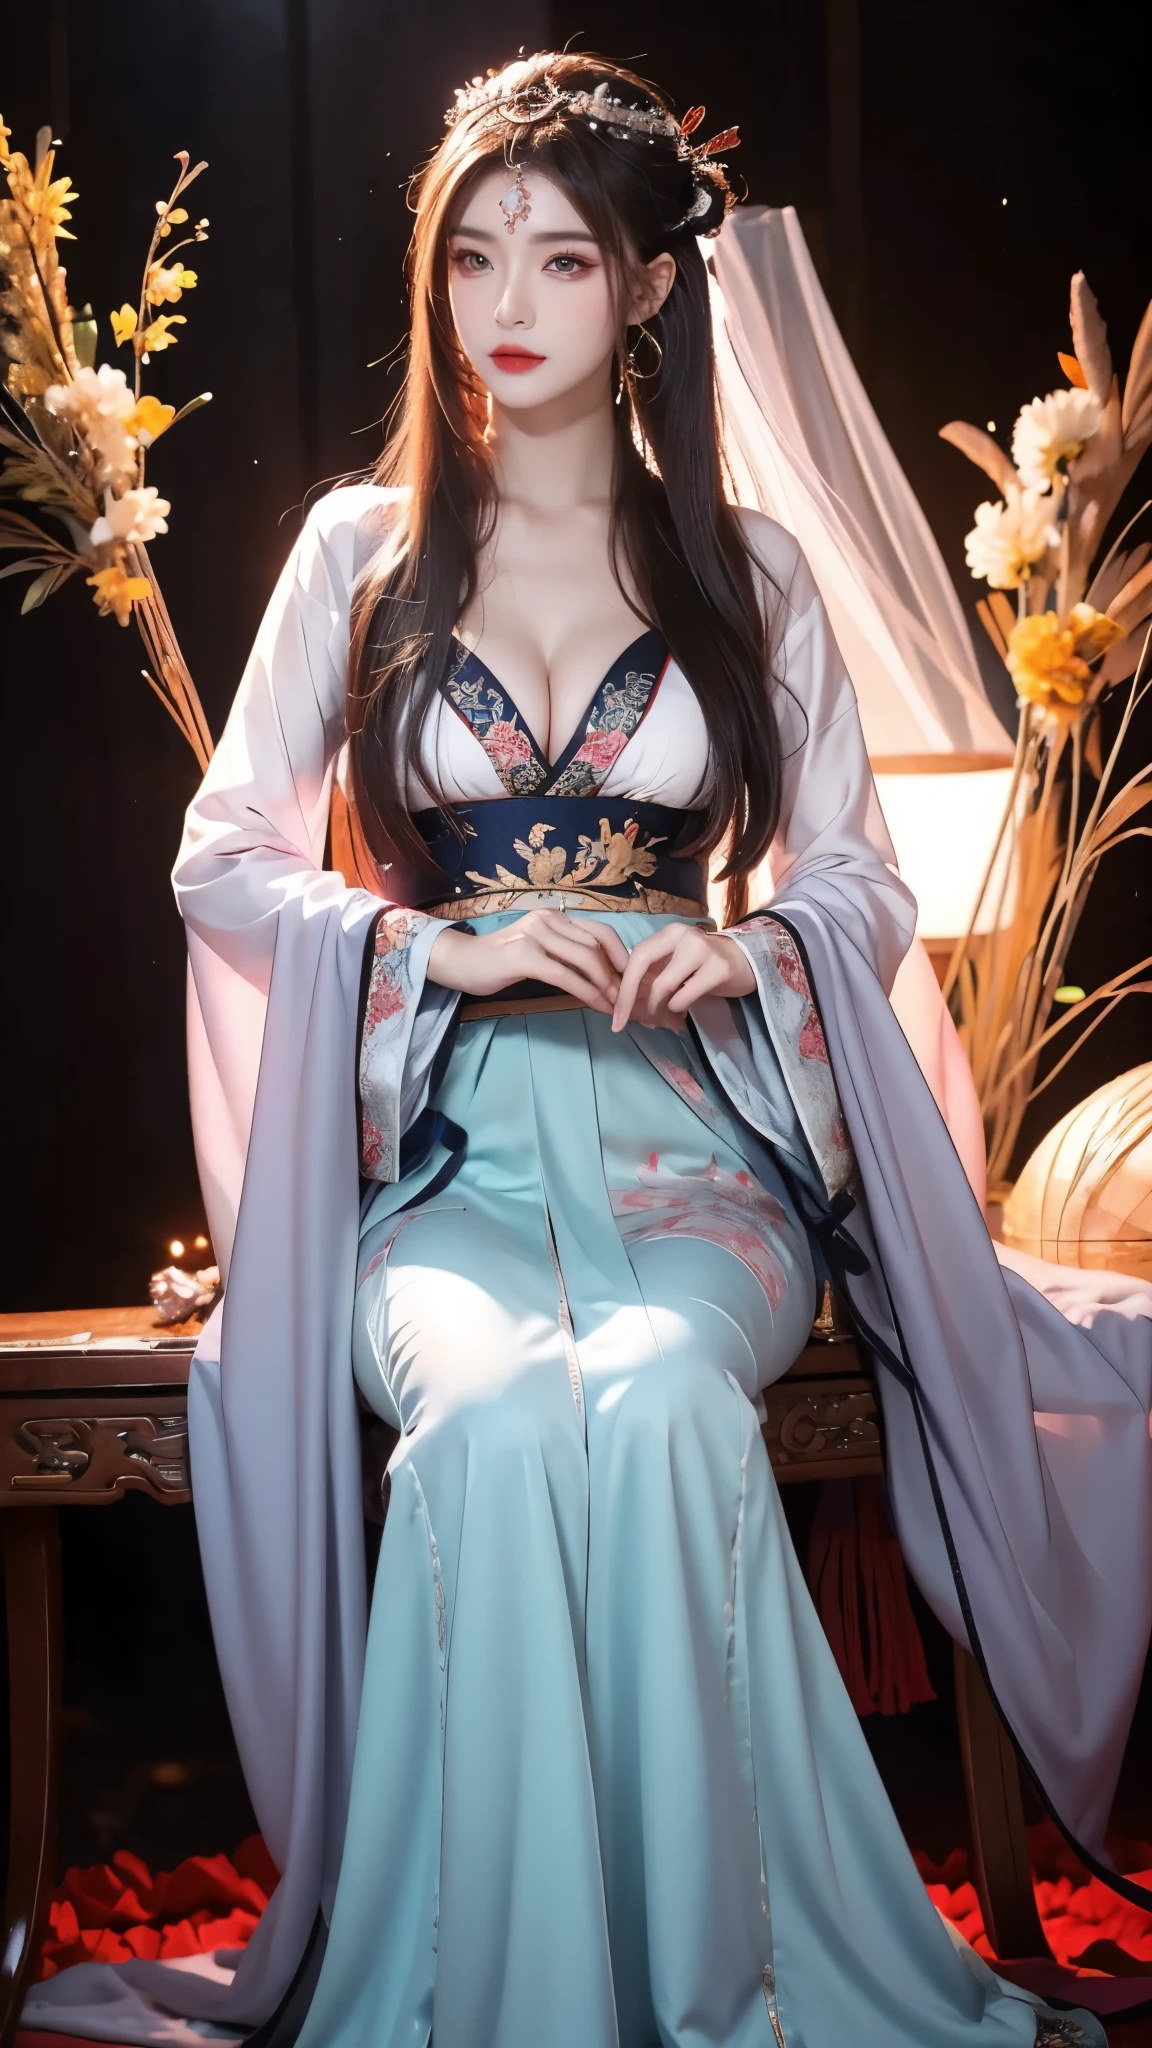 Shaosiming Hanfu, chinese clothes, traditional clothes, layered clothes,dress,red frilled shawl,
wide sleeves, long sleeves, sleeves past wrists, jewelry,hair stick, tiara, gem,ribbon,
hair ornament, purple hair, very long hair, blunt bangs, hair rings, ultra HD，red makeup,Ancient makeup,8k, masterpiece，Top image quality，A beautiful girl，phcrystal, ((I-type Valley)), ((Chest Window)), ((Visible cleavage)), enjoy,blush,excited,obsessed,Expression enjoy, Flowing long hair，Stunning Hairstyle，Crystal texture，sparkling，Skin like jade，Pink dream lights，Vast space background，Sit upright，Full body display，A familiar background。